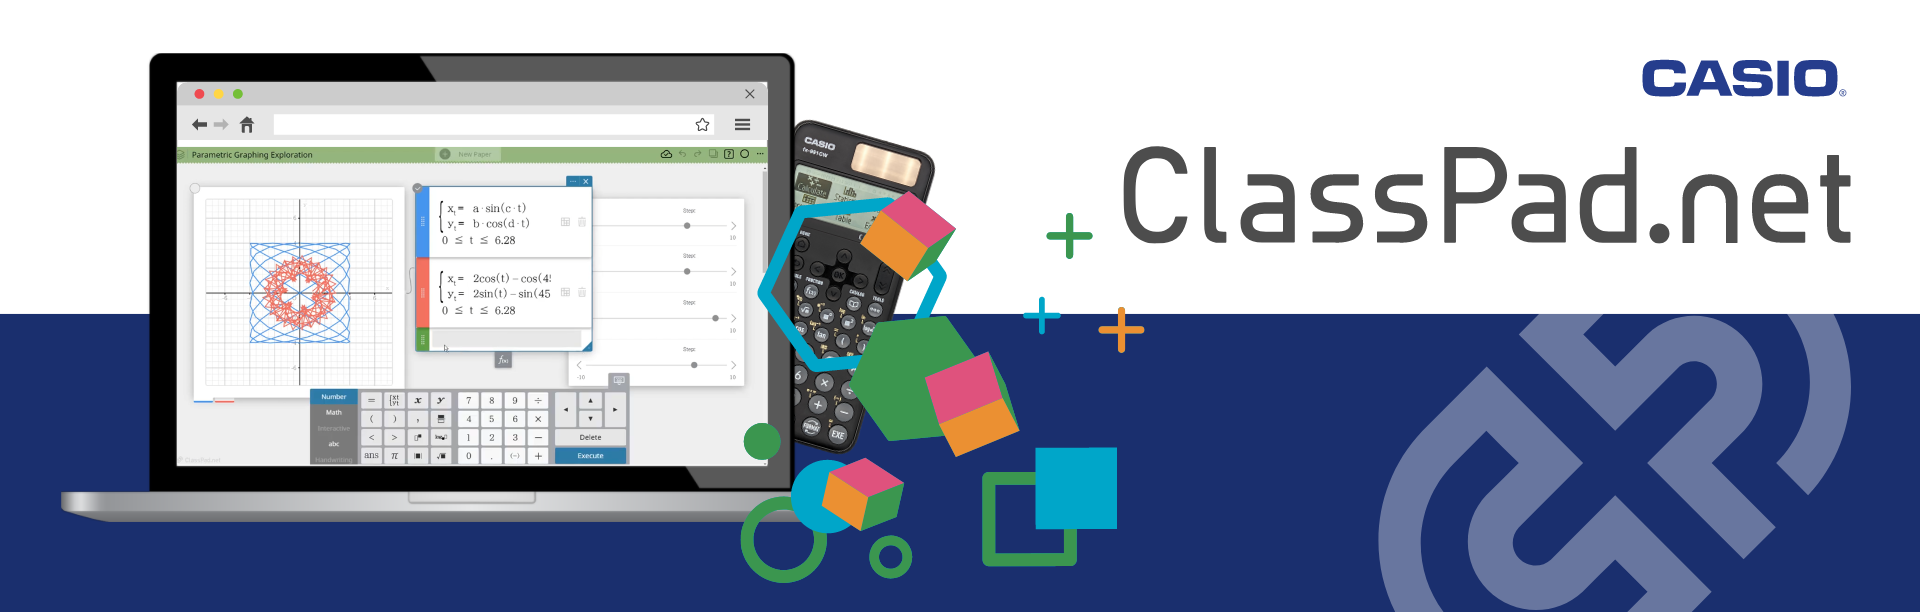 ClassPad.net Banner with Math Workspace Example